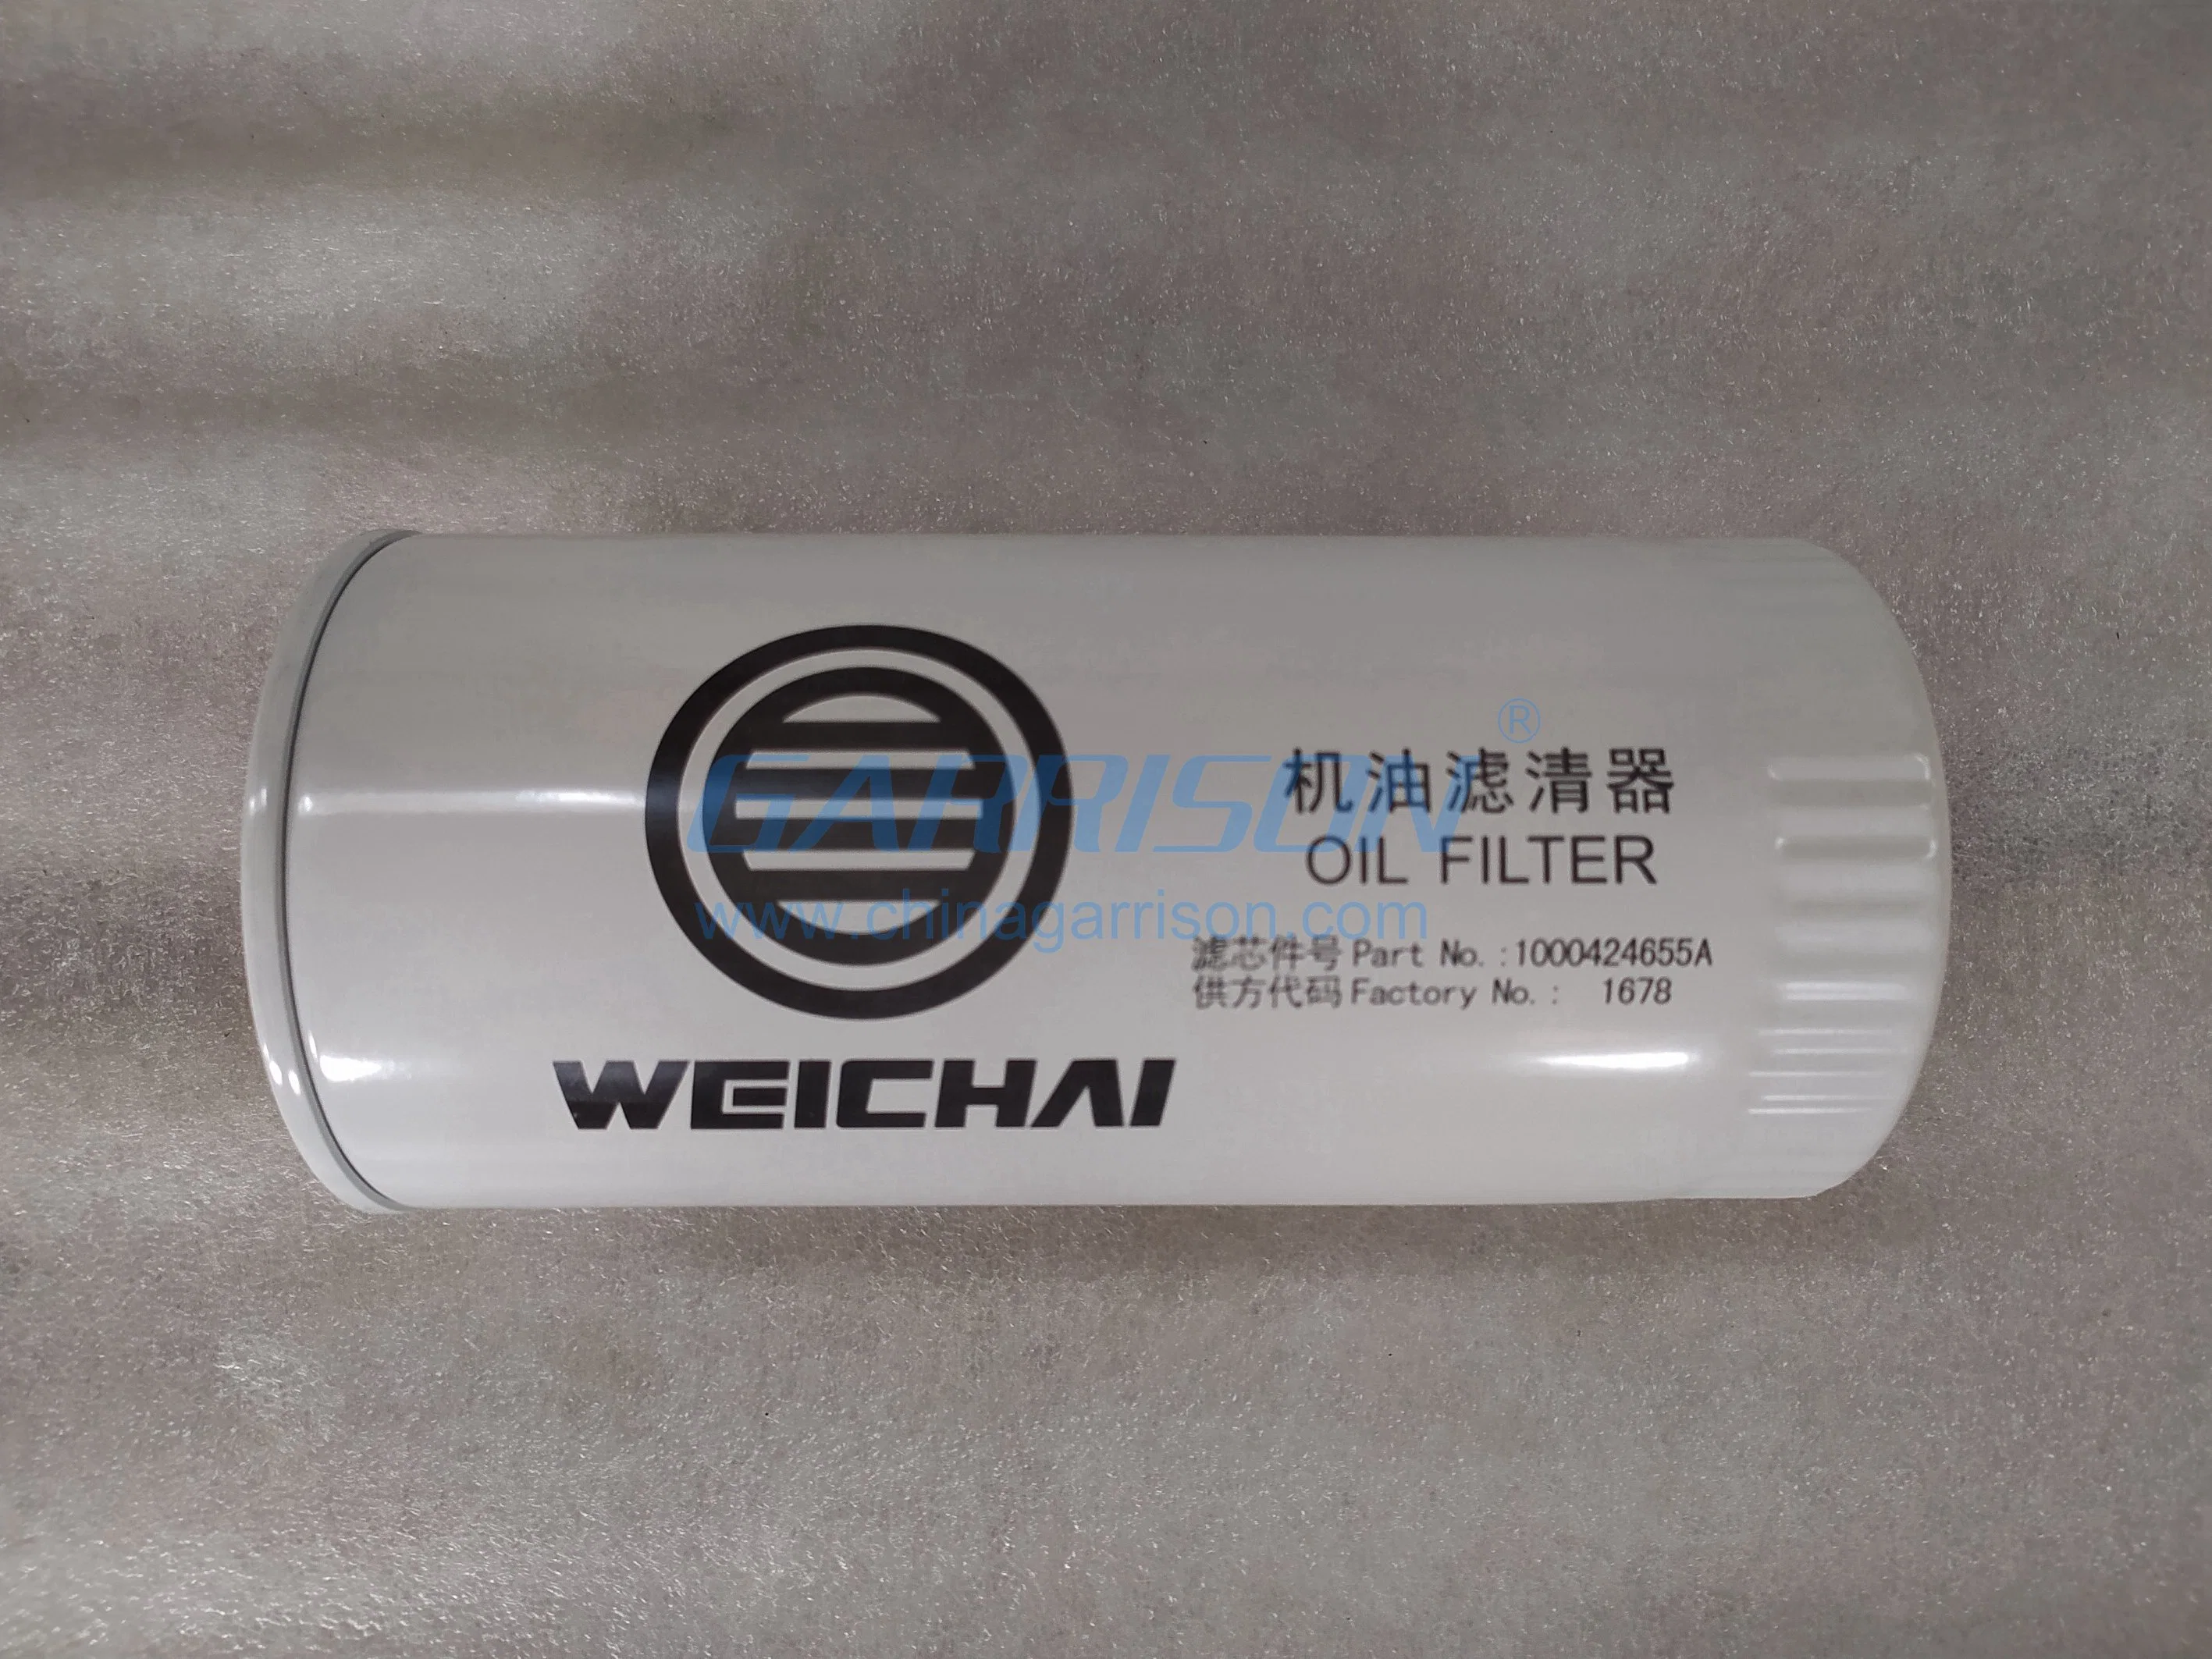 Sinotruk Oil Filter Vg61000070005 Euroii Fuel Filter All Kinds of Truck Spare Parts for Weichai & FAW & Shacman & Beiben & Foton & Sinotruk